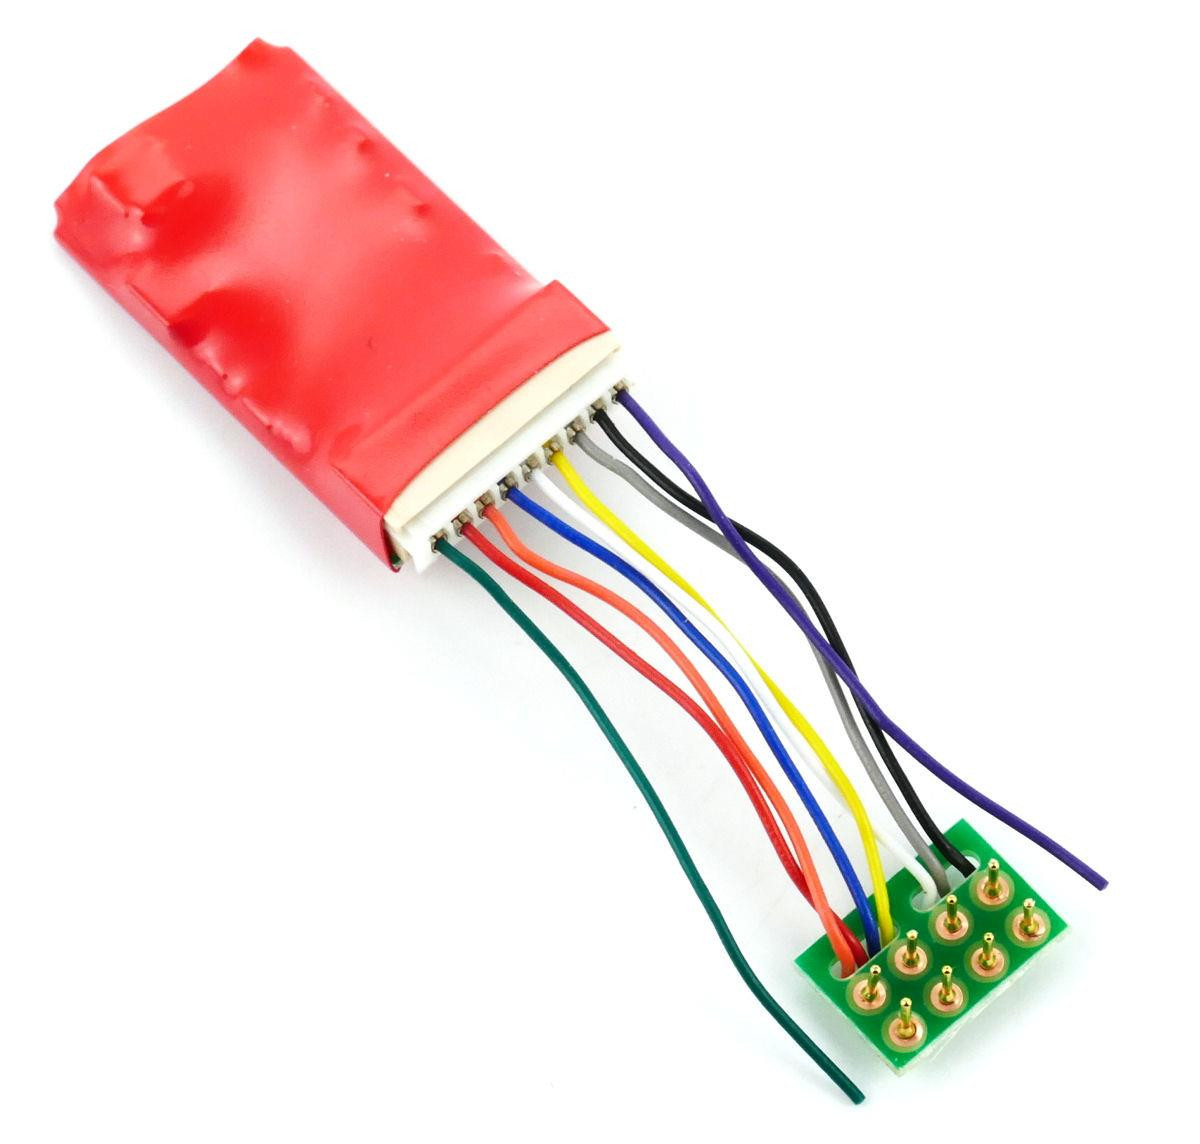 #D# Ruby Series 6fn Pro DCC Decoder 8 Pin